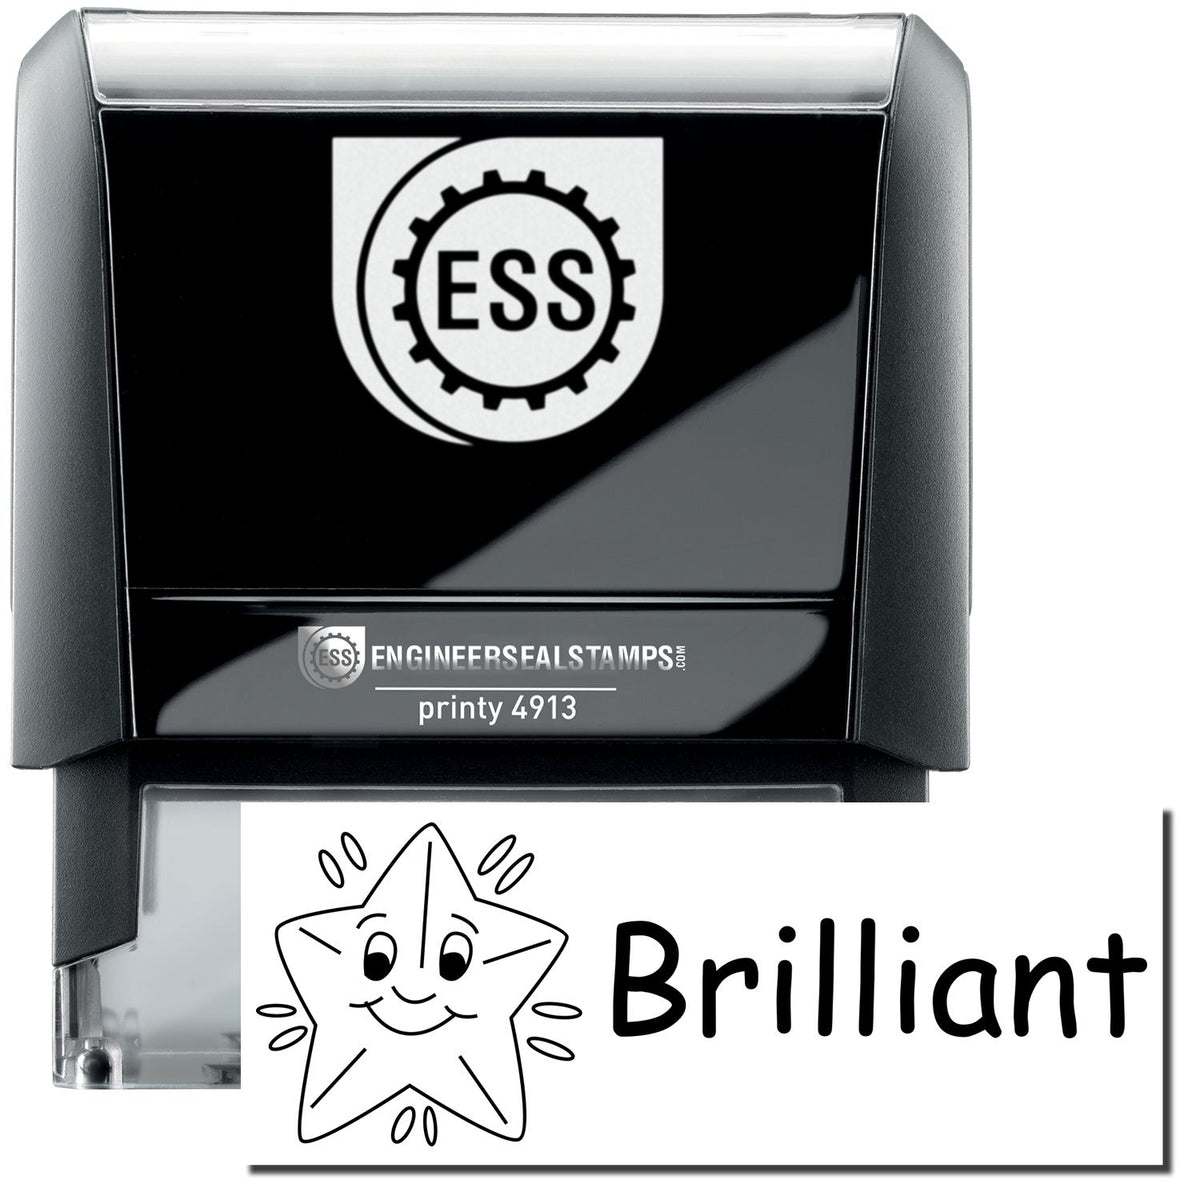 A self-inking stamp with a stamped image showing how the text &quot;Brilliant&quot; with a shining smiley star in a large font is displayed by it after stamping.